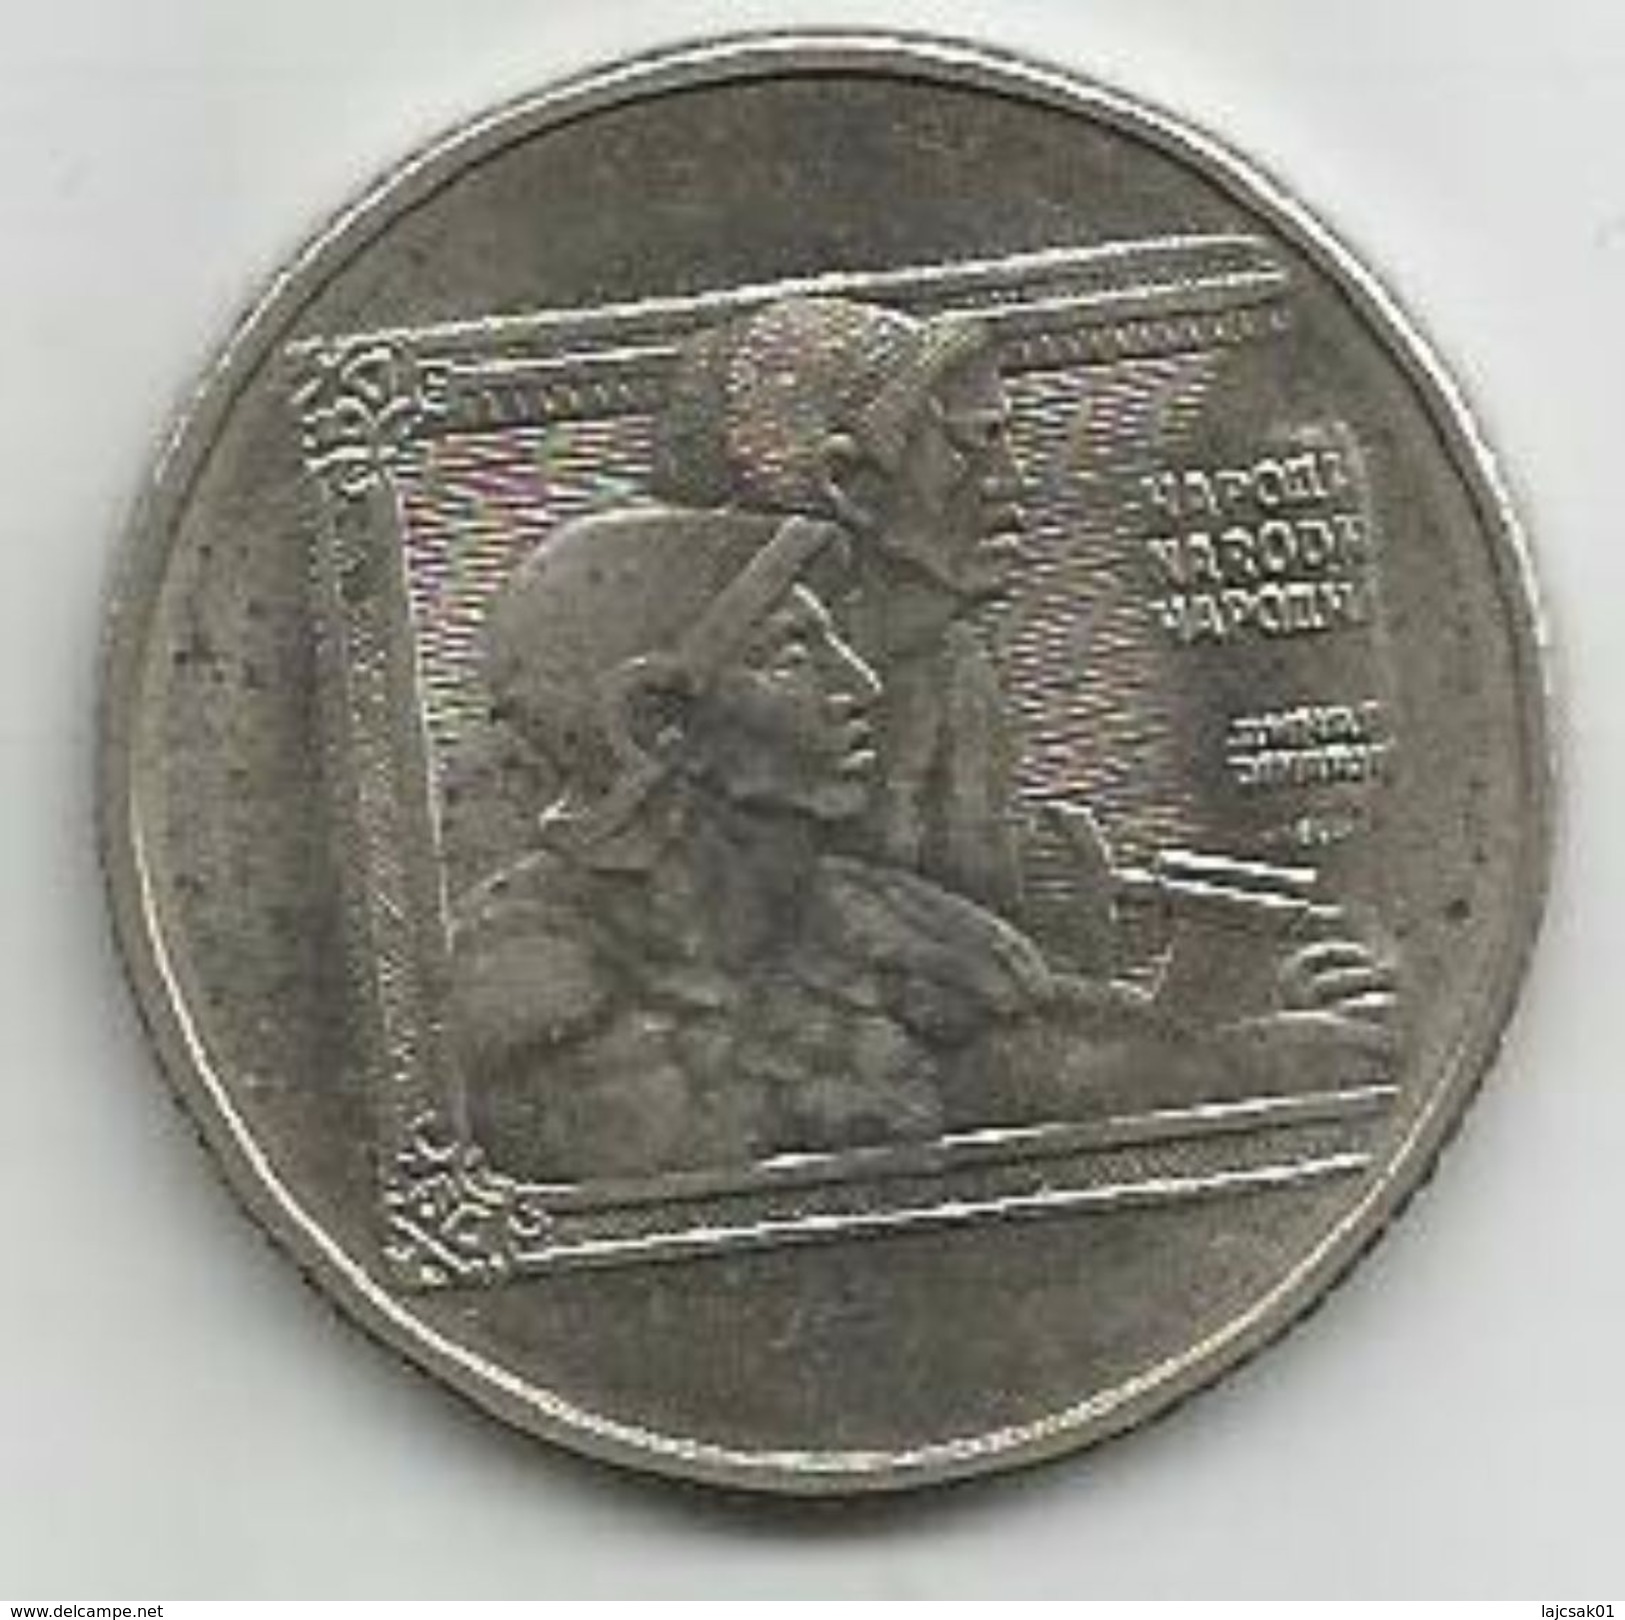 Token Of The Institut For Manufacturing Banknotes And Coins ZIN Beograd Serbia - Professionals / Firms